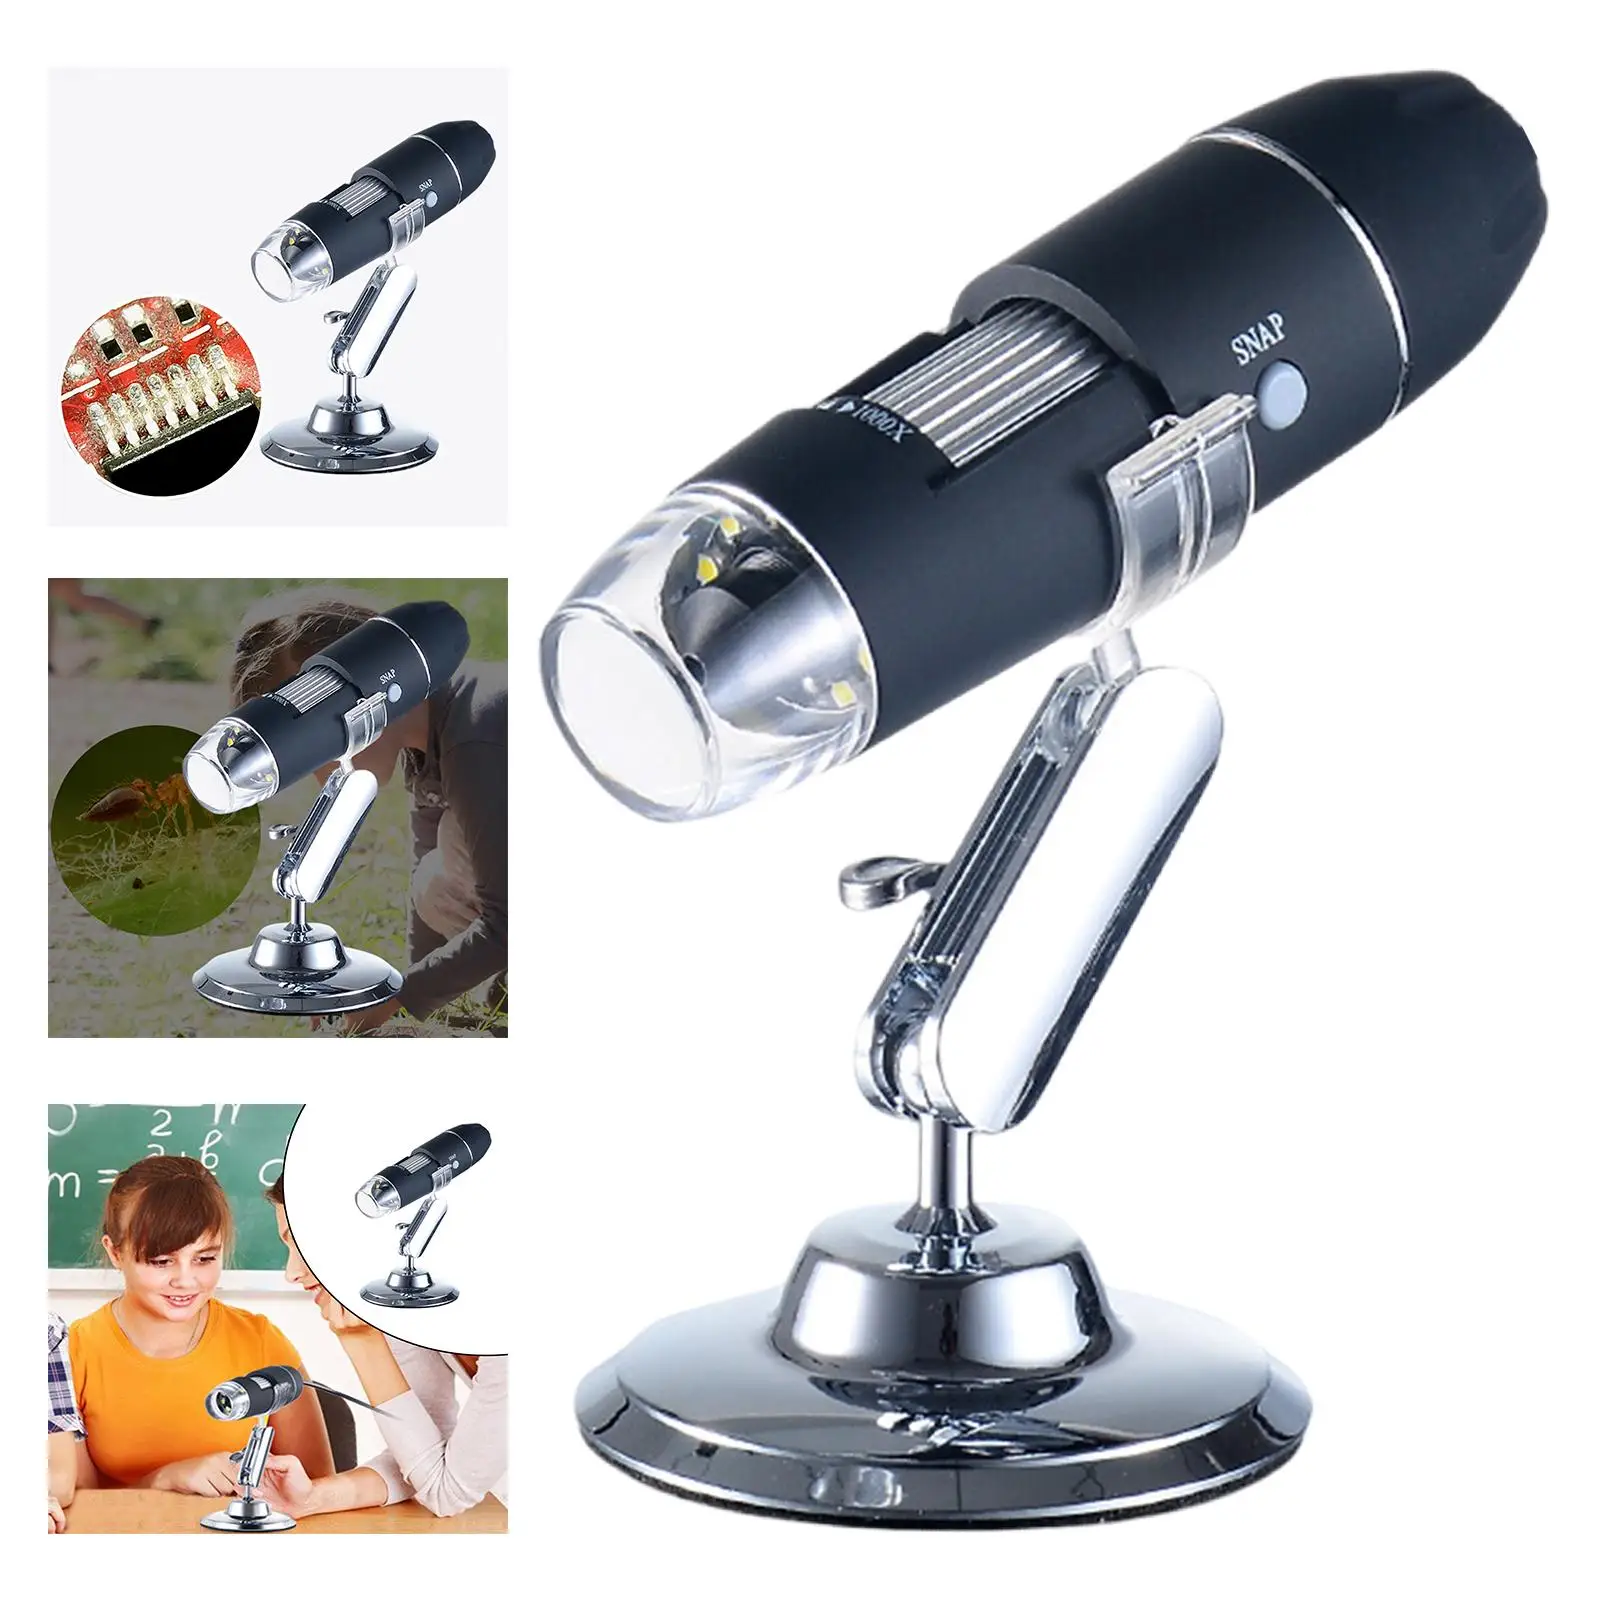 1600x Digital Microscope Camera USB Portable Electronic Microscope and Adjustable Stand with 8 LED Lights for Windows Smartphone